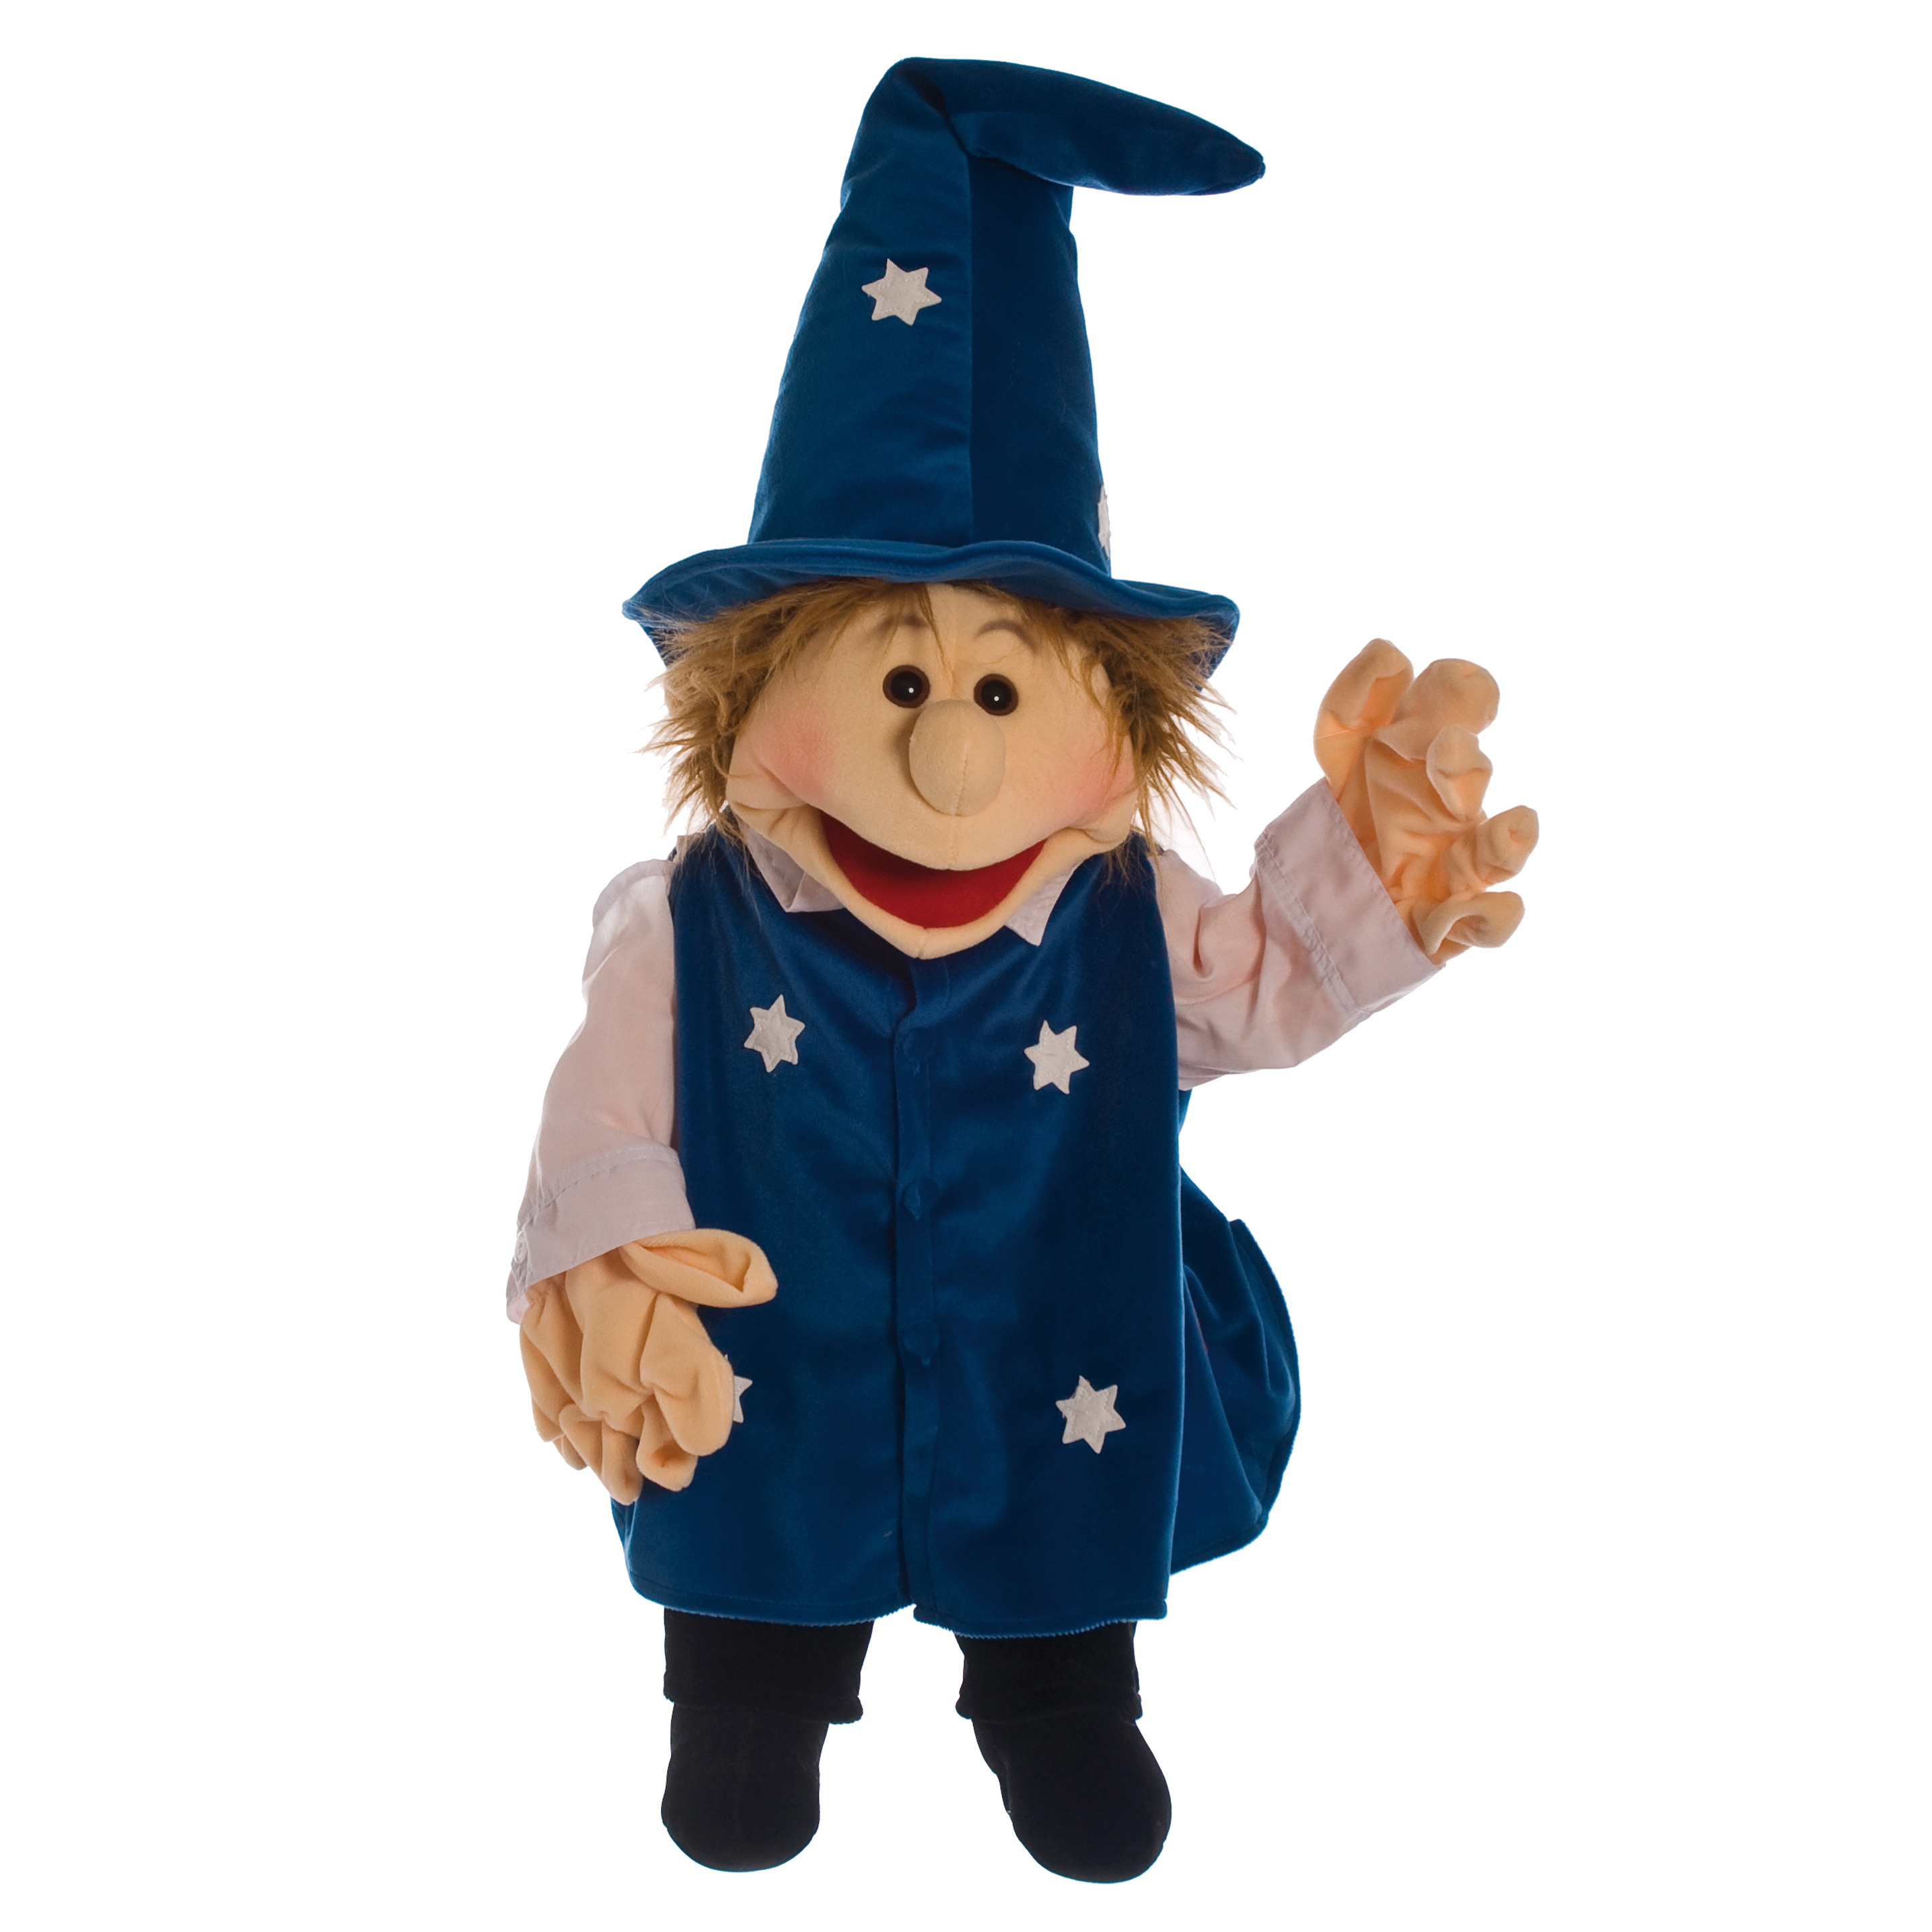 Living Puppets hand puppet sorcerers apprentice Fidibus